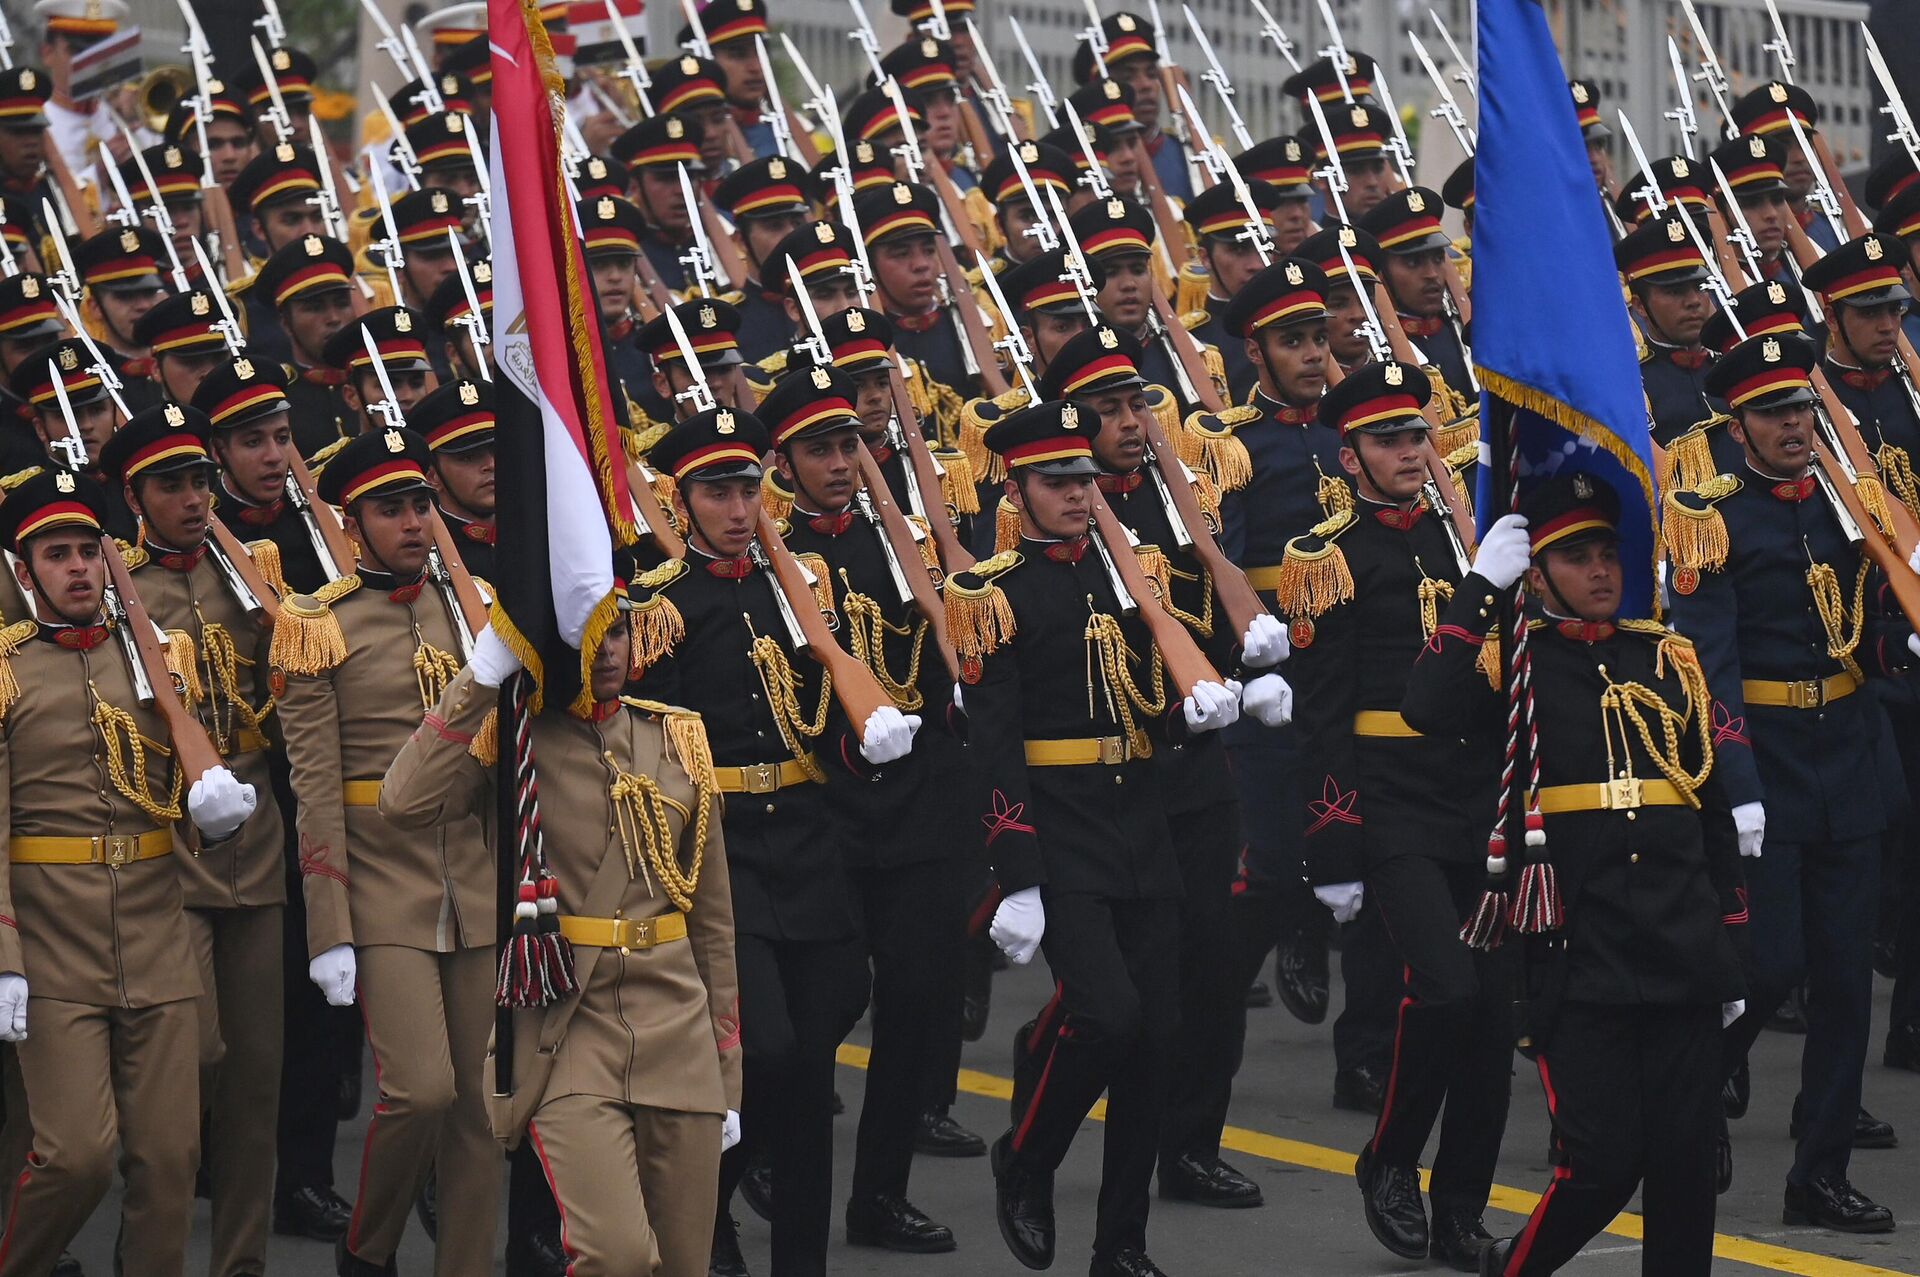 Egypt's Armed Forces march past during India’s 74th Republic Day parade in New Delhi on January 26, 2023. - Sputnik India, 1920, 26.01.2023